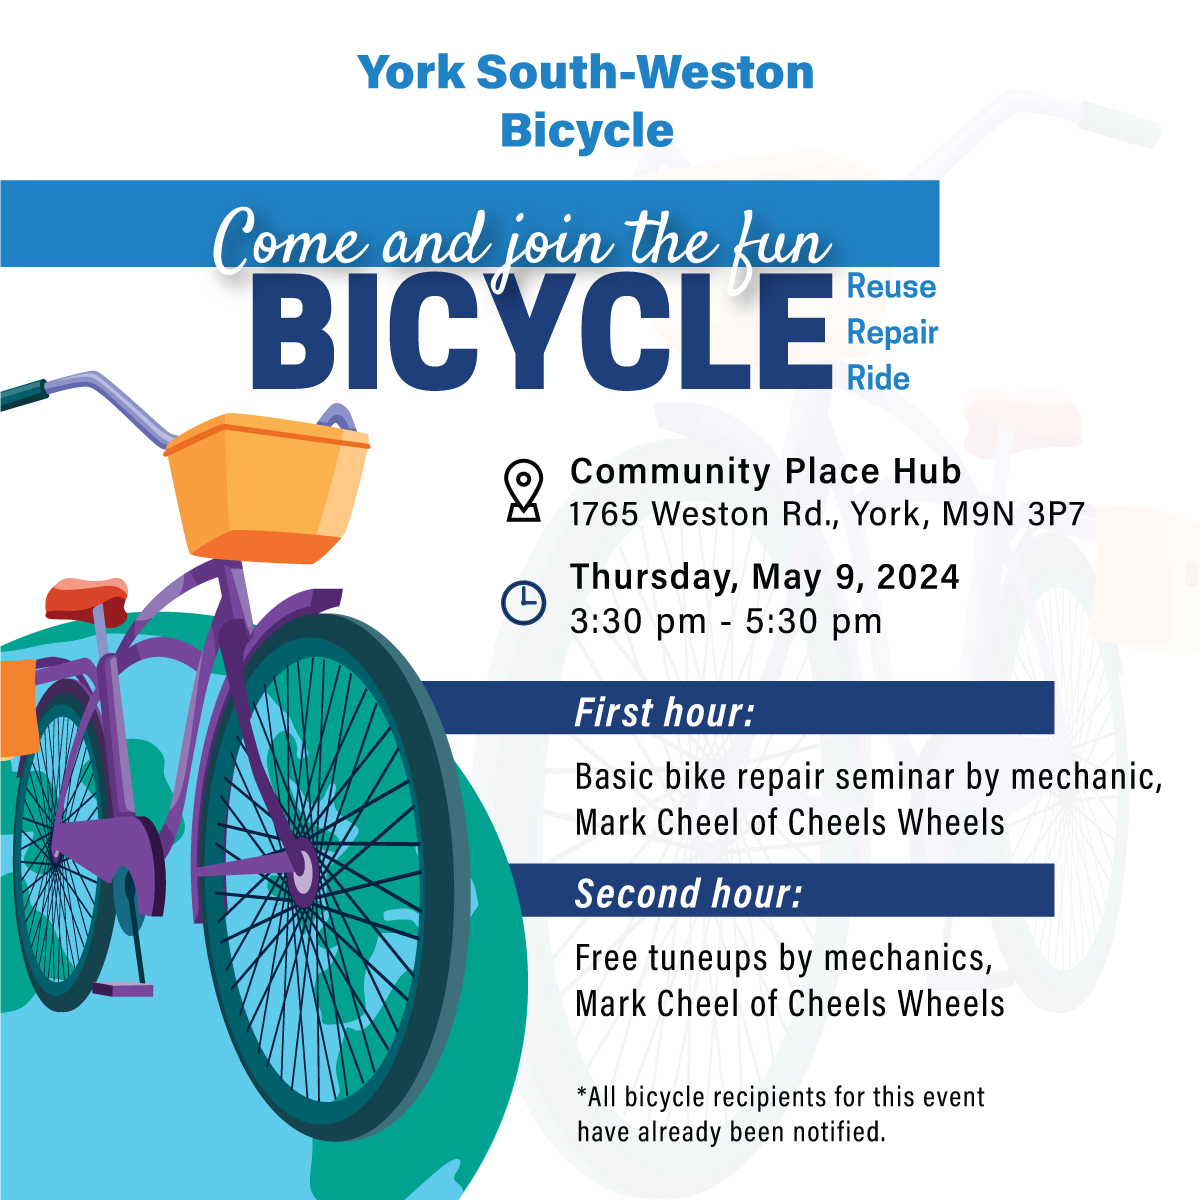 REMINDER: Come and join the fun! BICYCLE - REUSE - REPAIR - RIDE 🚵‍♀️ 🗓️Thursday, May 9, 2024 ⏰3:30 pm - 5:30 pm 📍Location: 1765 Weston Road, York, M9N 3P7 For more information: 416-323-1429 #Bicycle #Wellness #Health